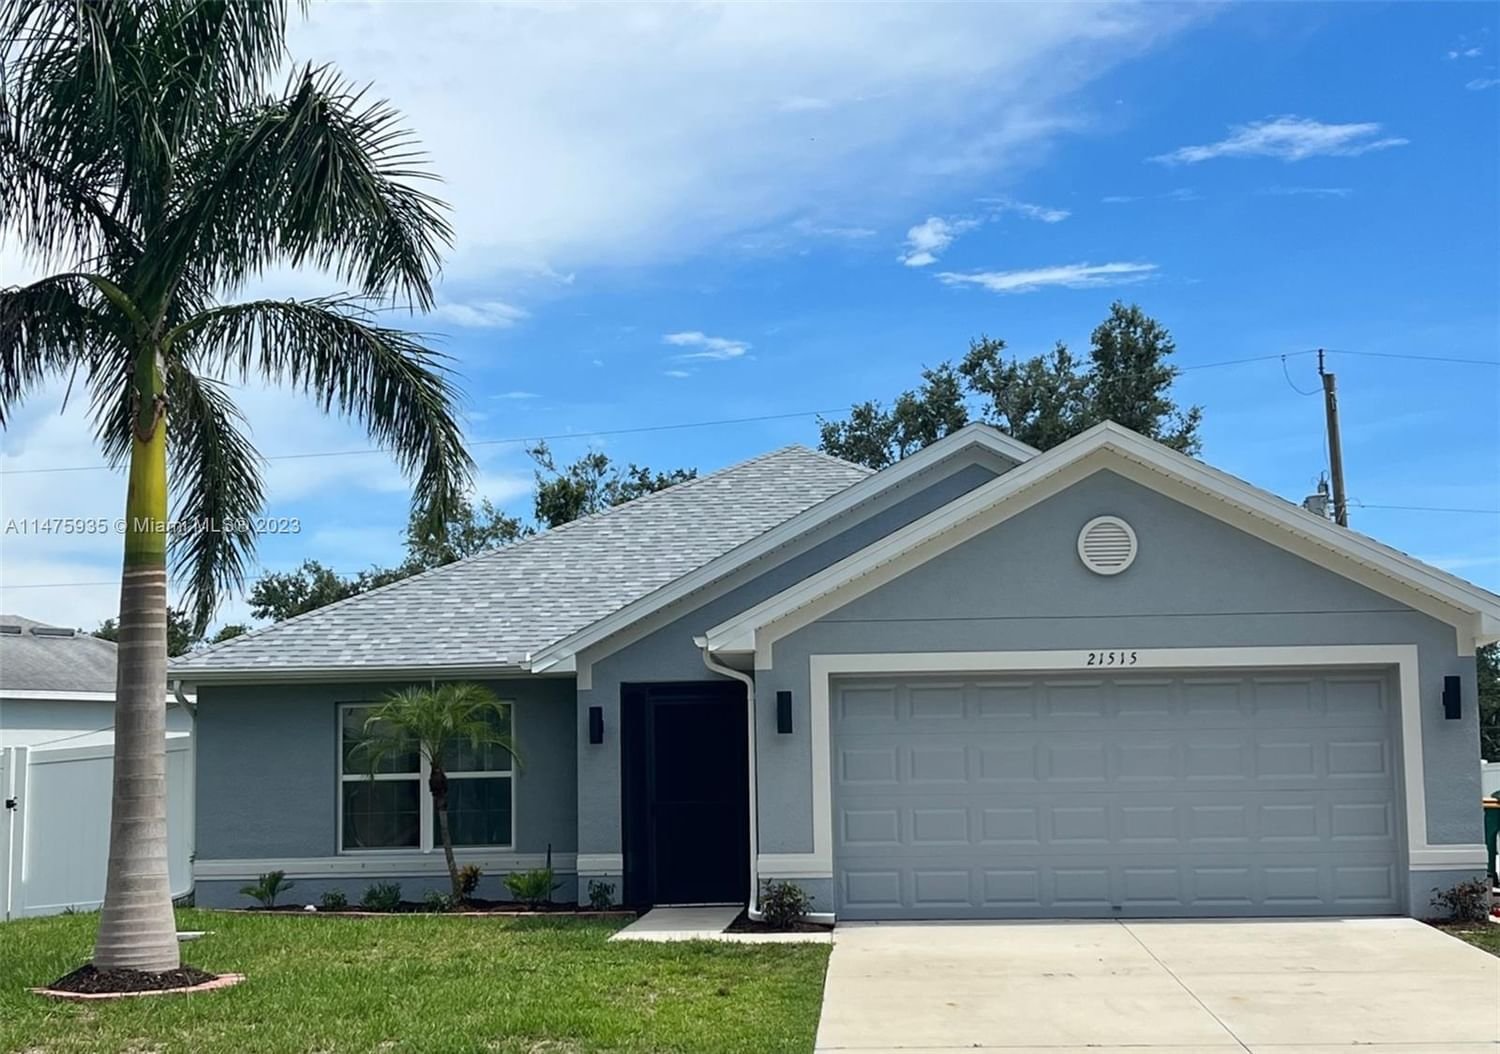 Real estate property located at 21515 VOLTAIR AVE, Charlotte County, Port Charlotte sec 033, Port Charlotte, FL